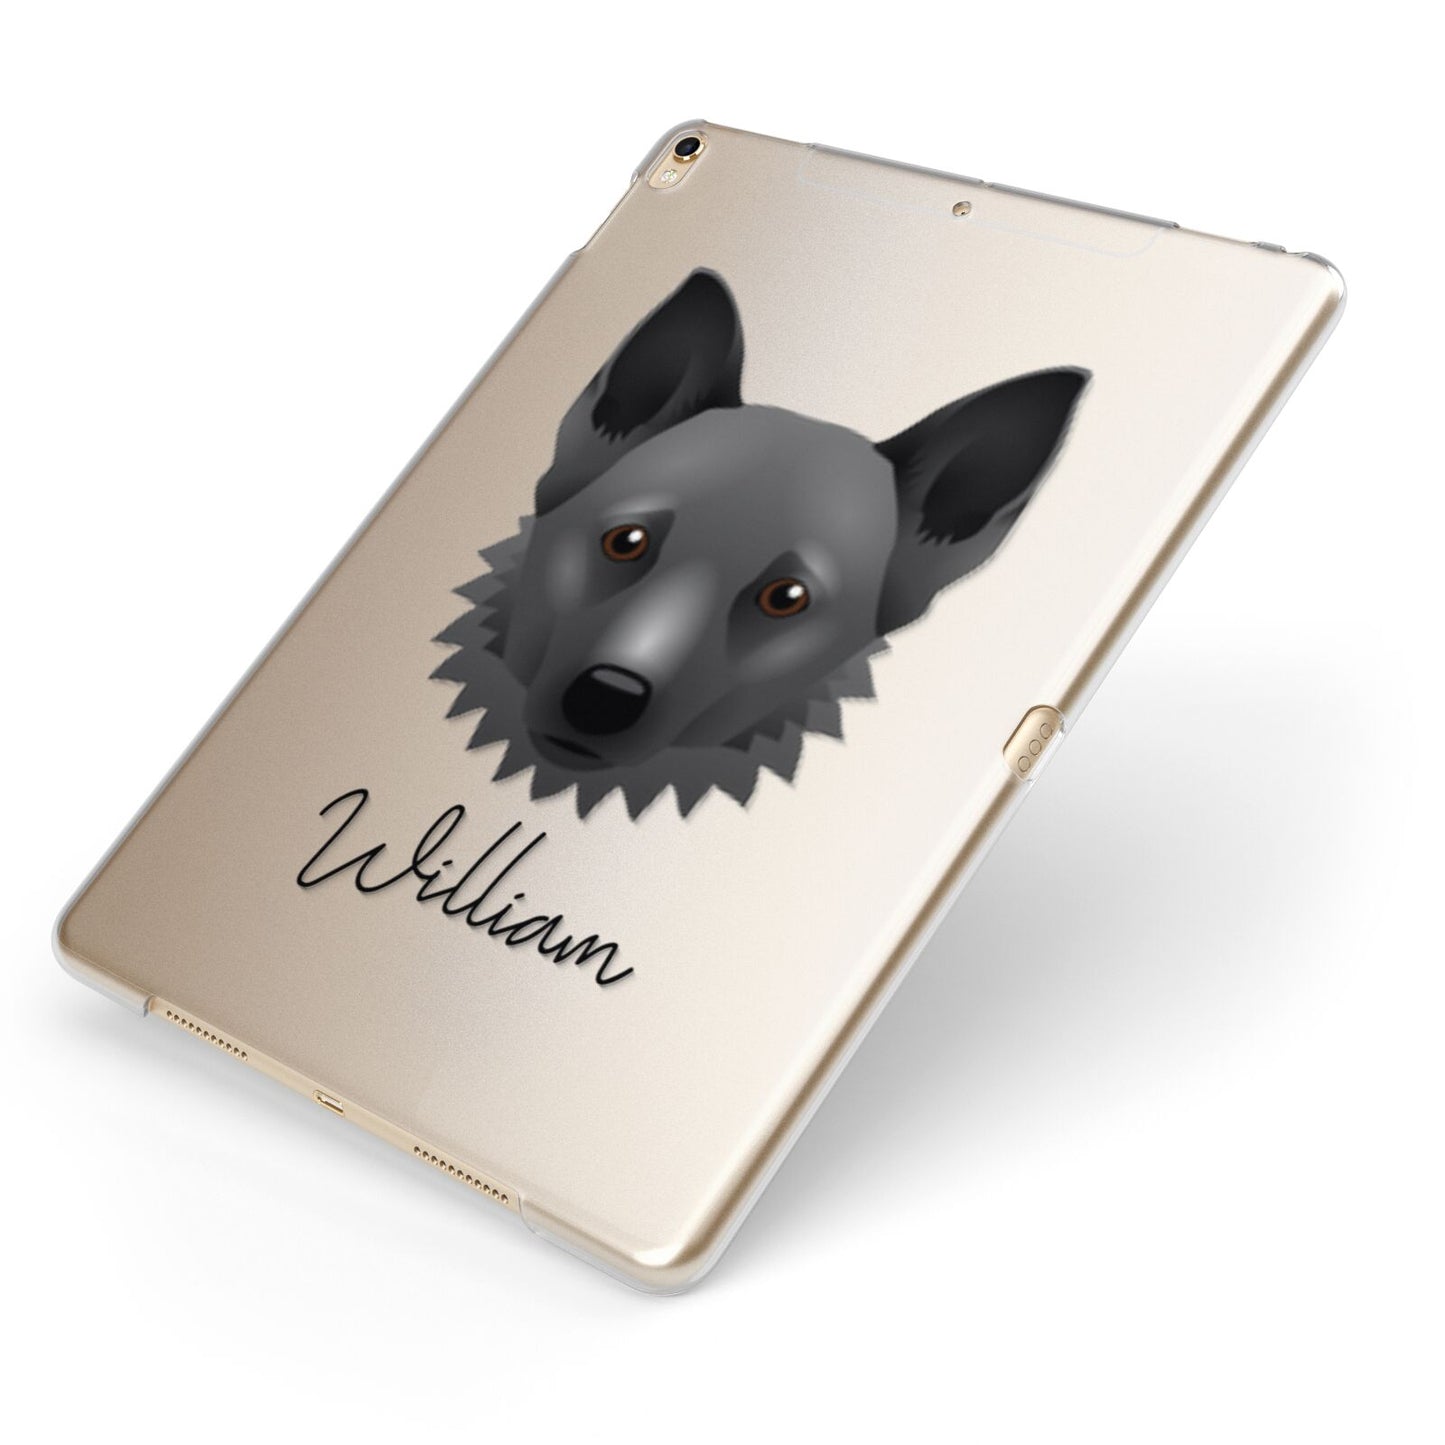 Canaan Dog Personalised Apple iPad Case on Gold iPad Side View